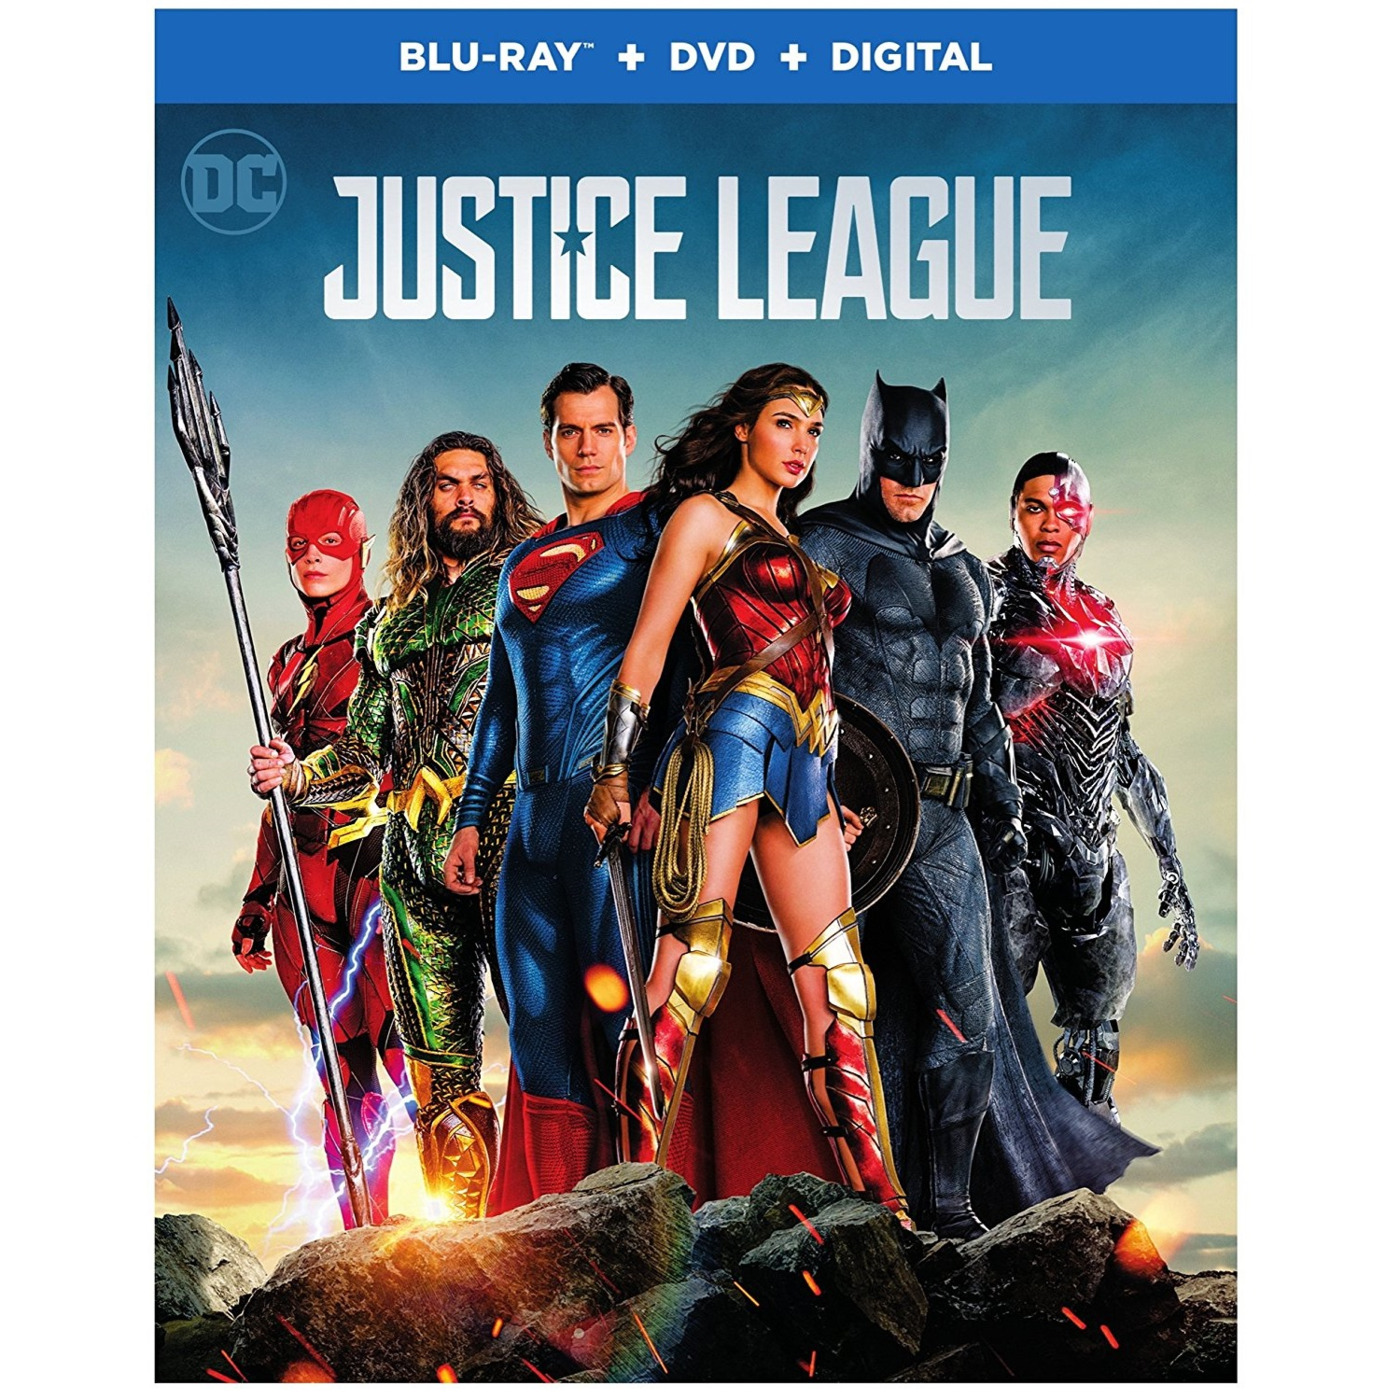 Justice League - Special Episode - Audio Commentary